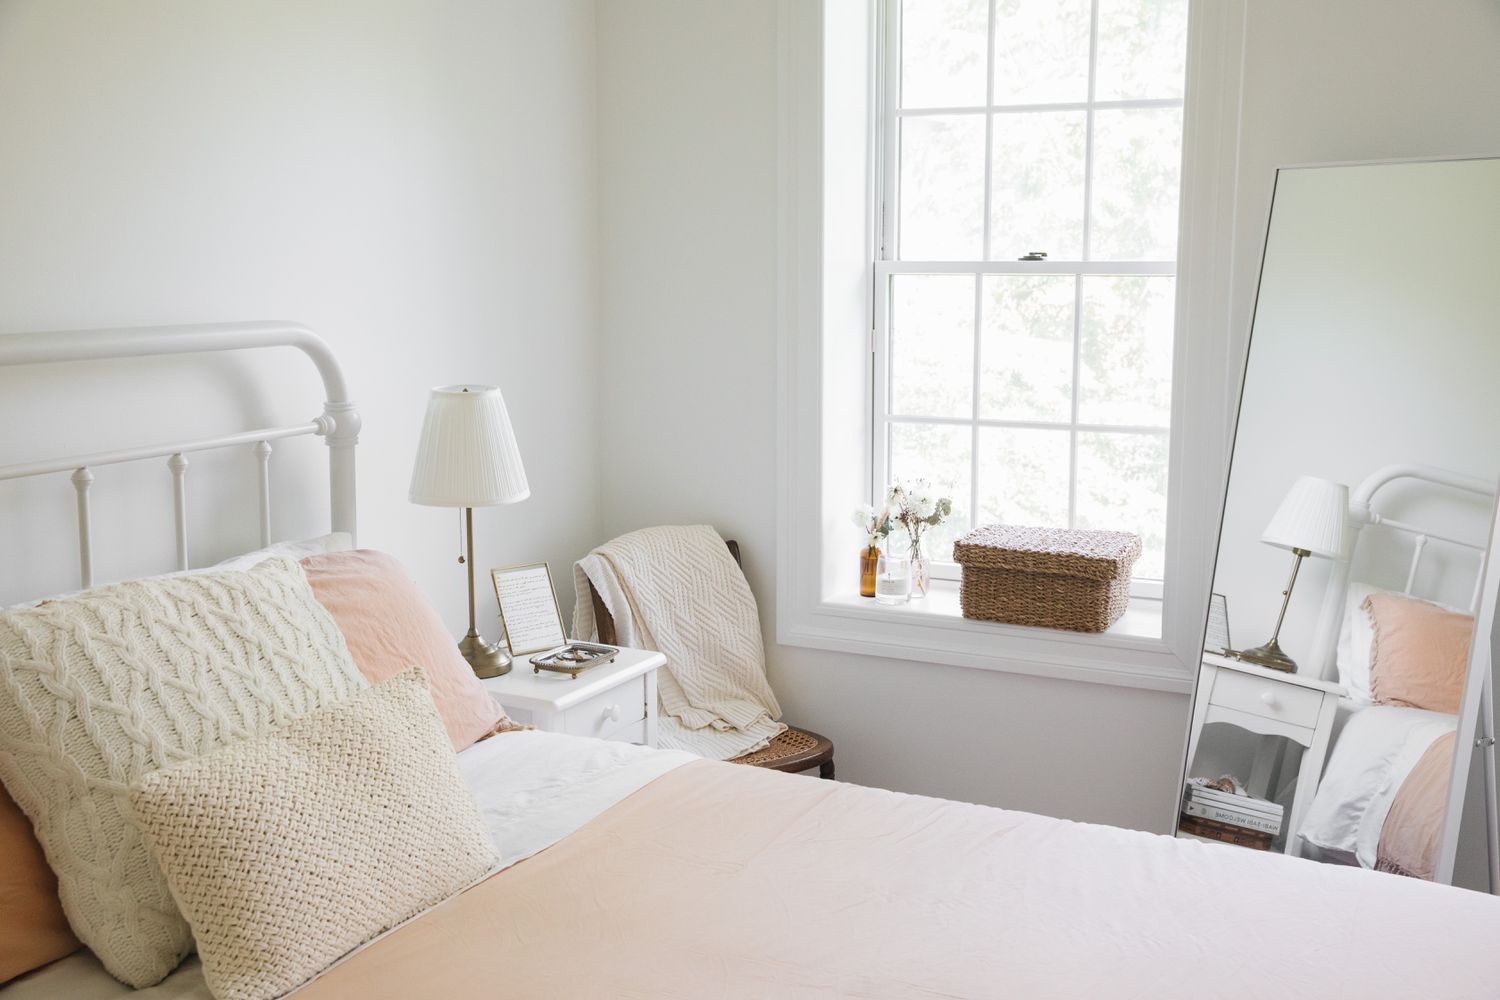 Where Should Mirrors Be Placed In A Bedroom For Feng Shui?